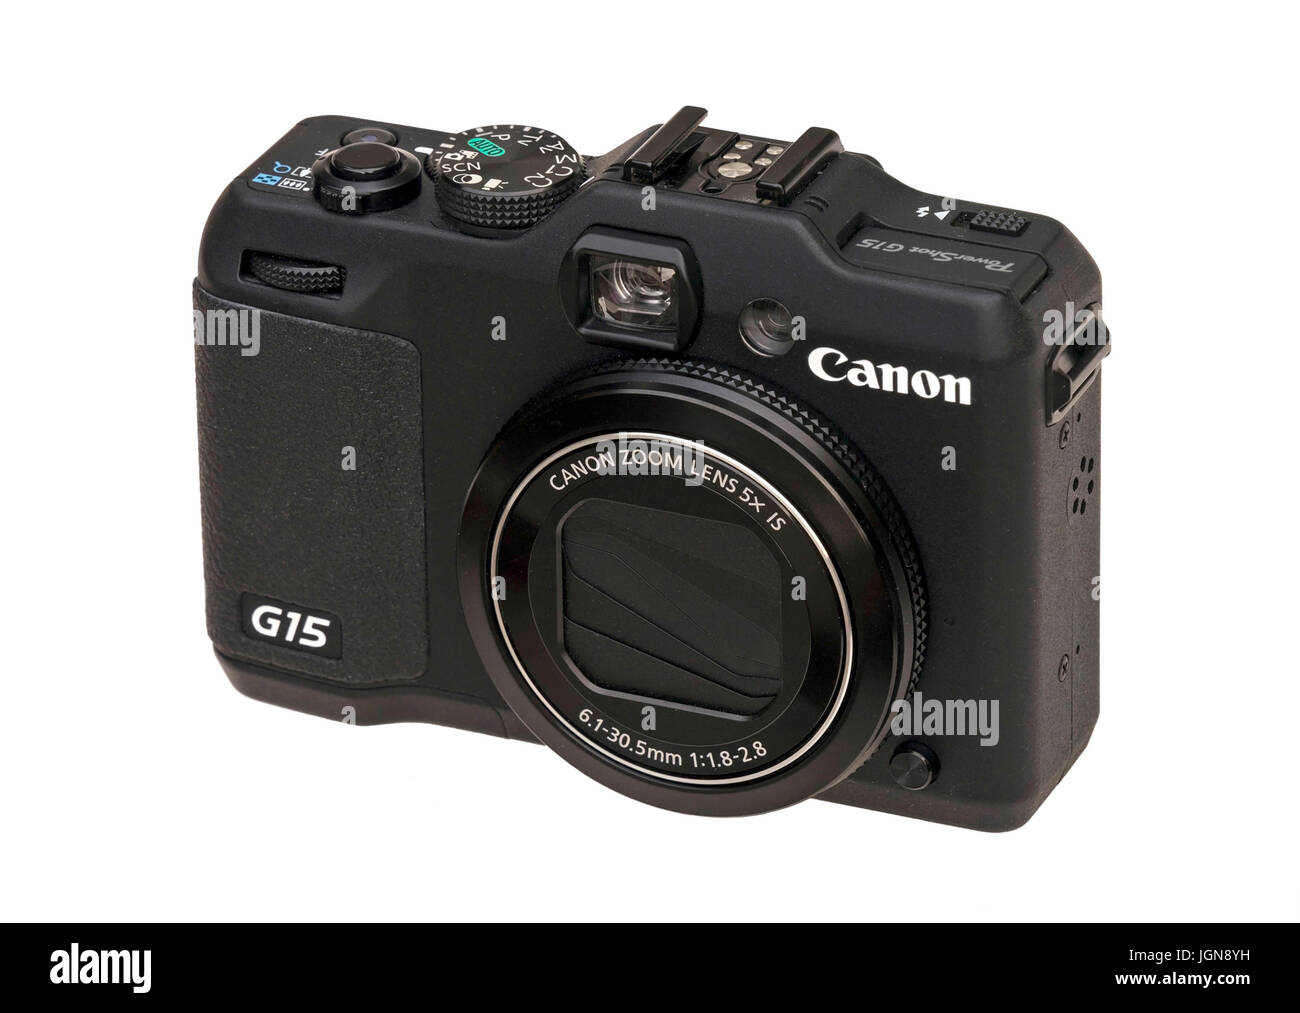 Front view of Canon Powershot G15 compact digital camera on white background Stock Photo